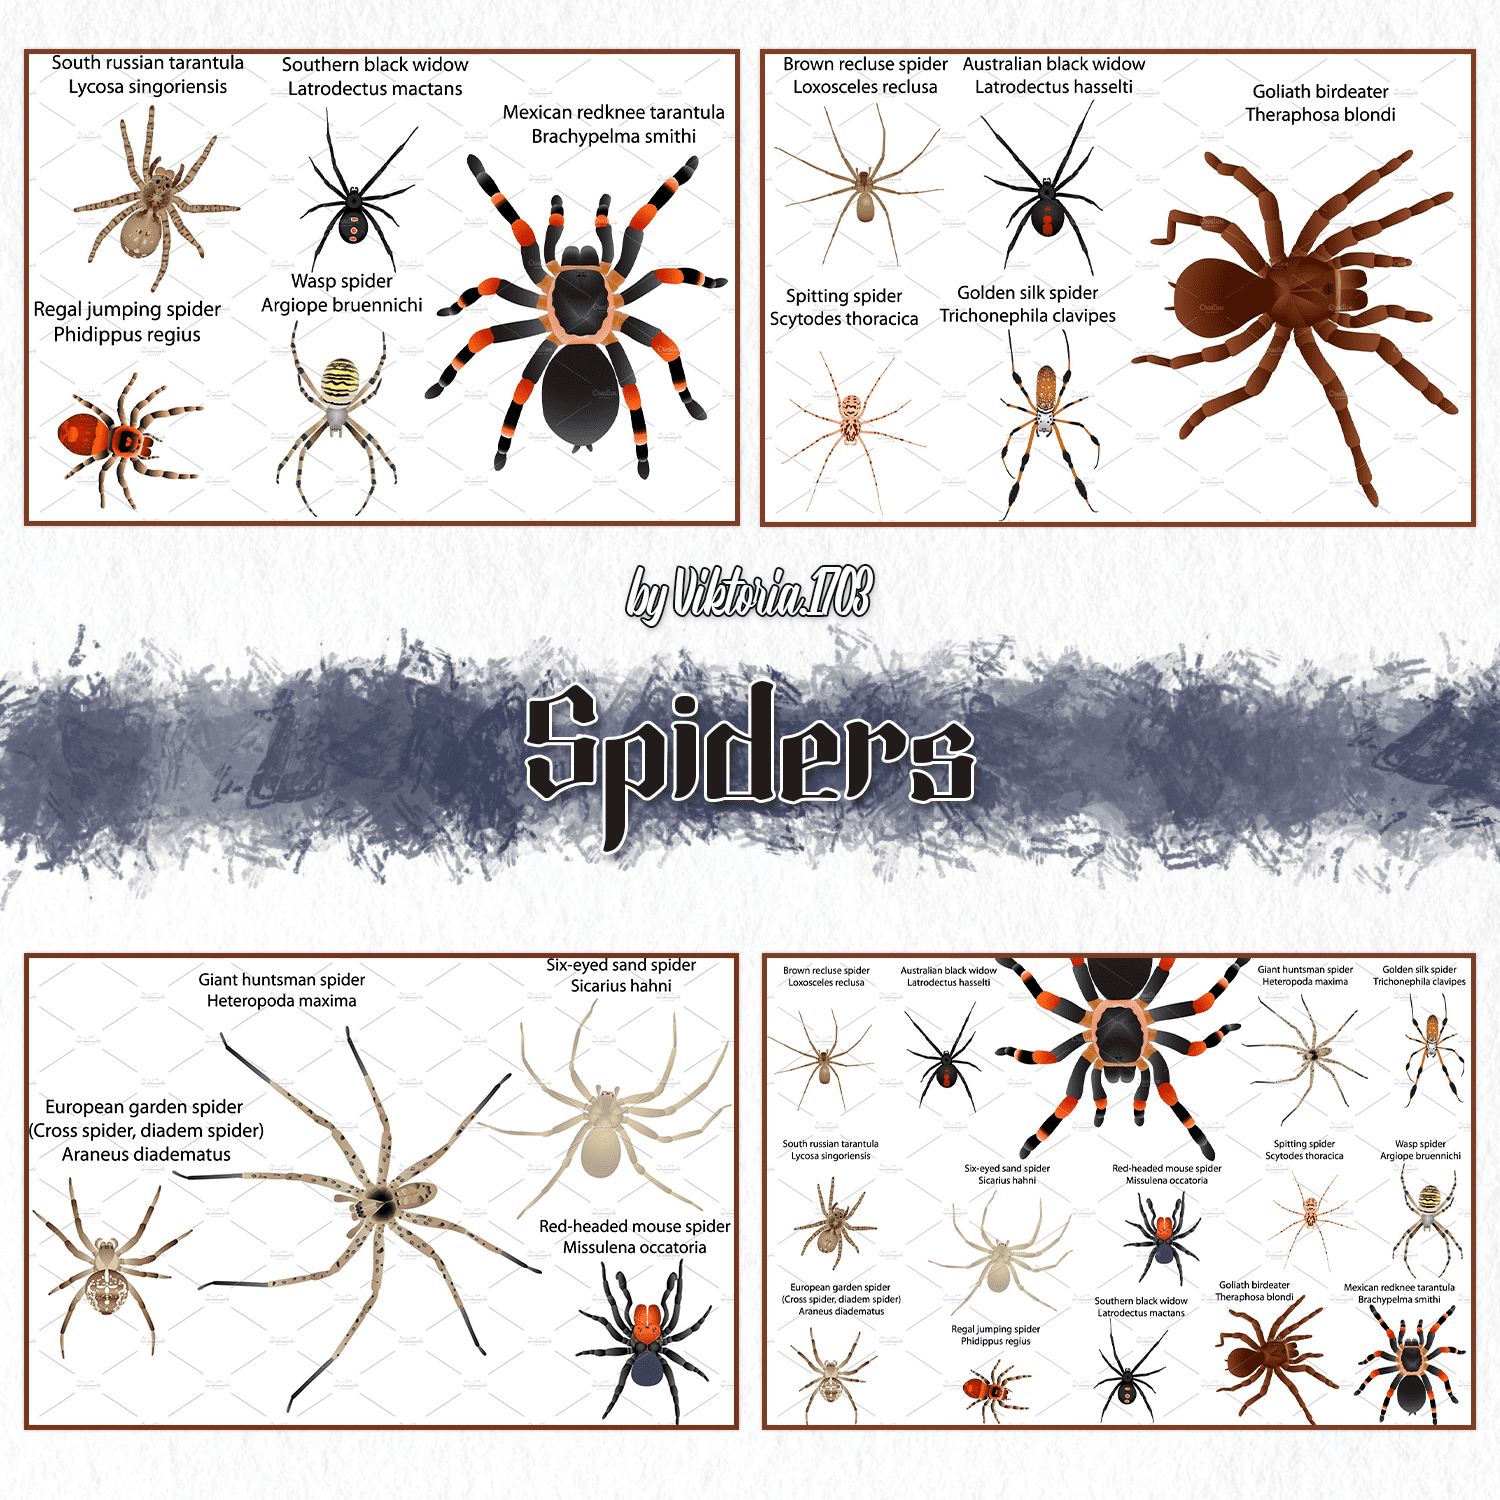 Spiders cover.